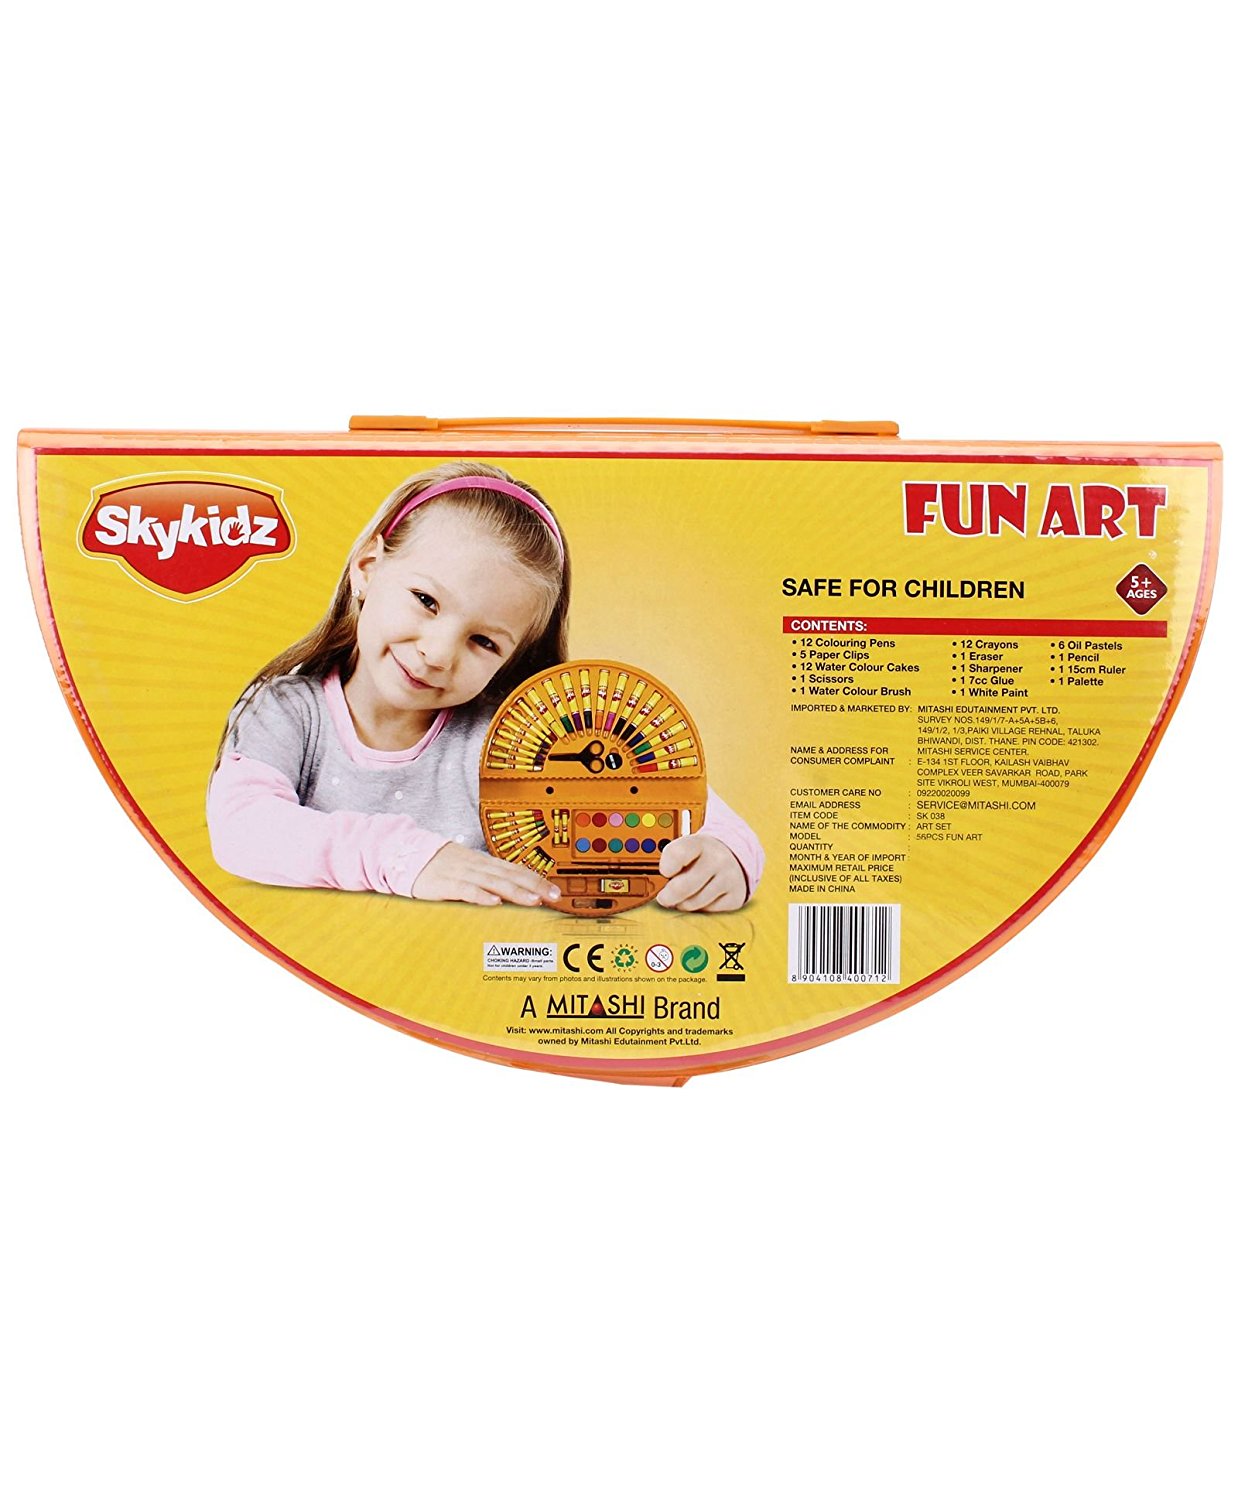 Looking for a gift for 5+ year old – Sky Kids Art Set can be a good option